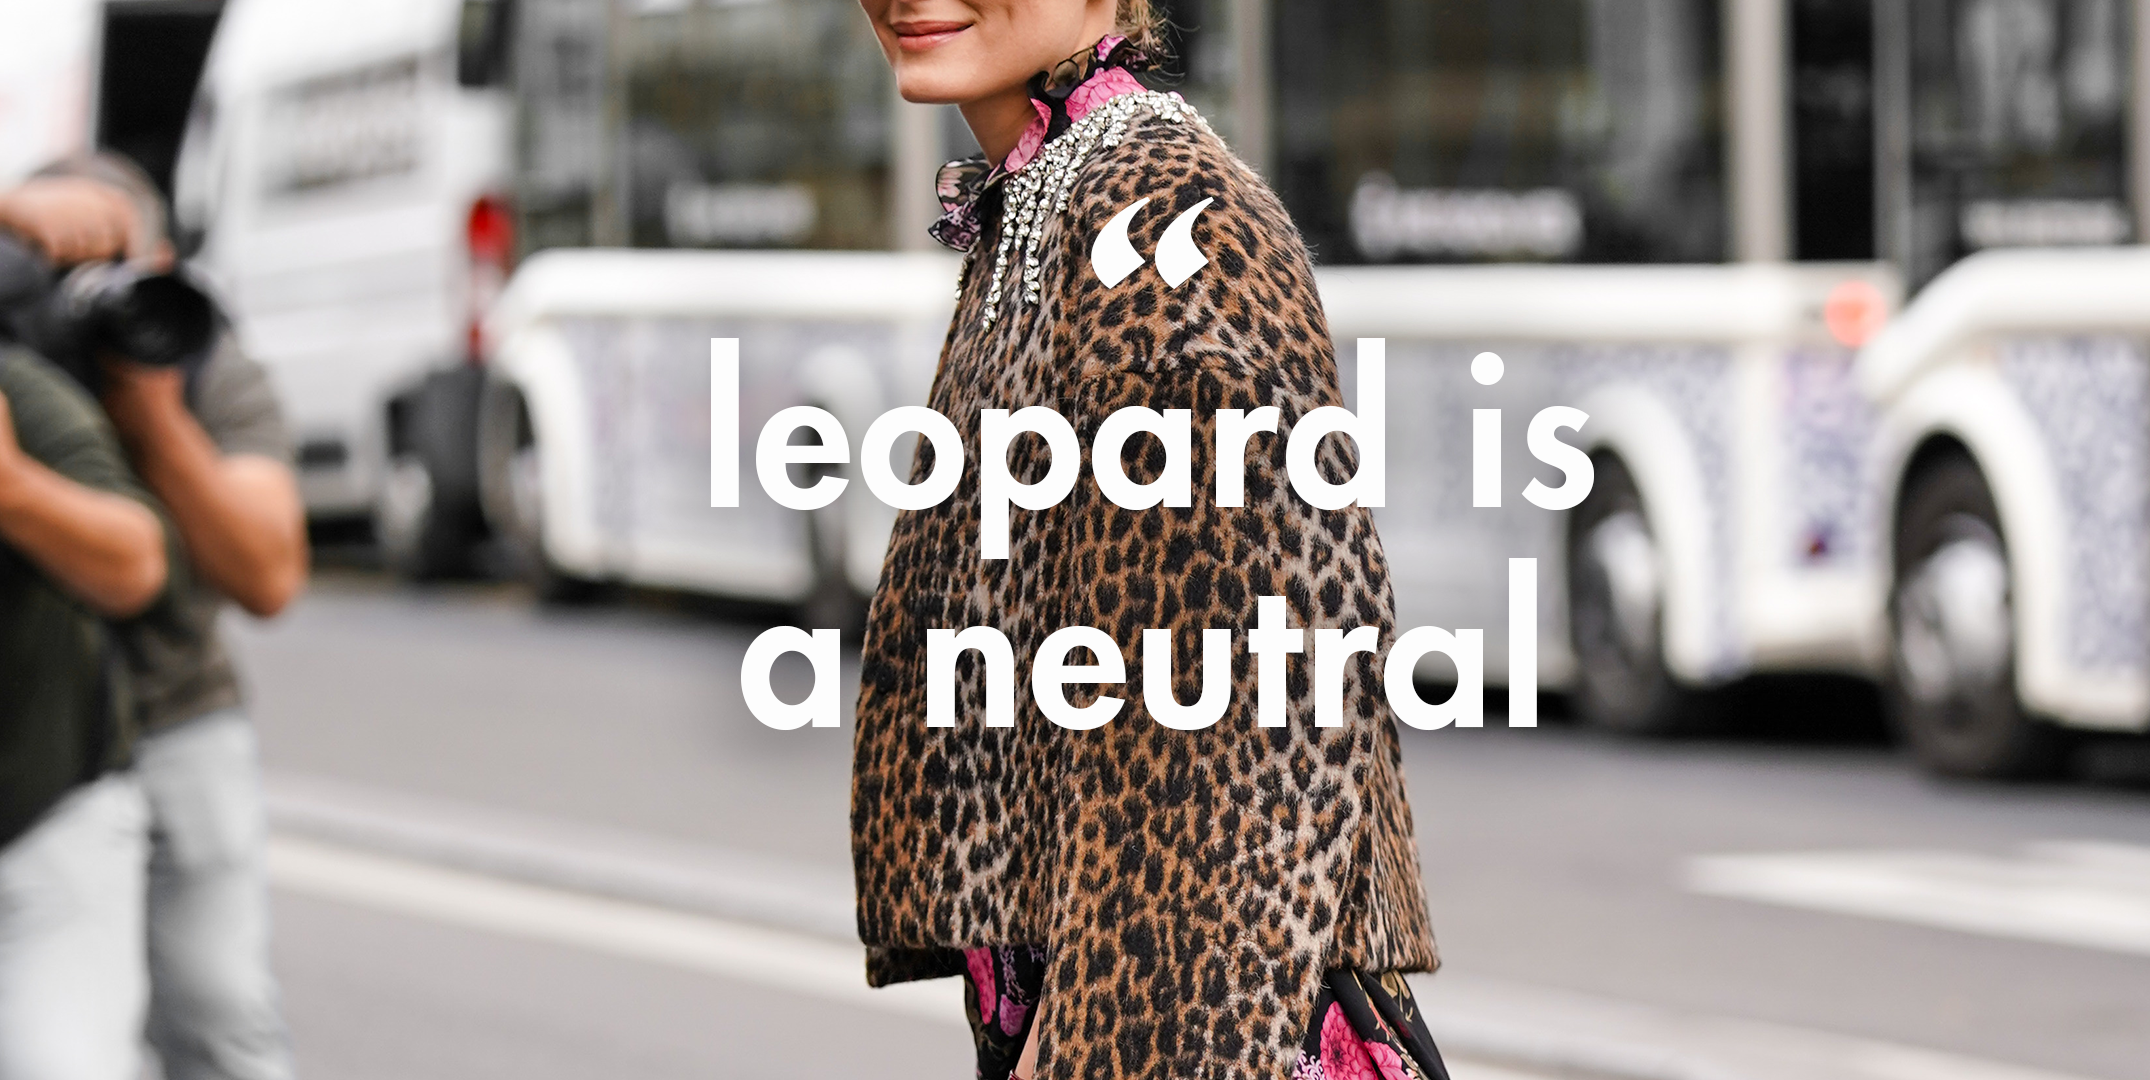 The Ideal Wardrobe, According to Coco Chanel  Chanel fashion, Coco chanel  quotes, Fashion quotes